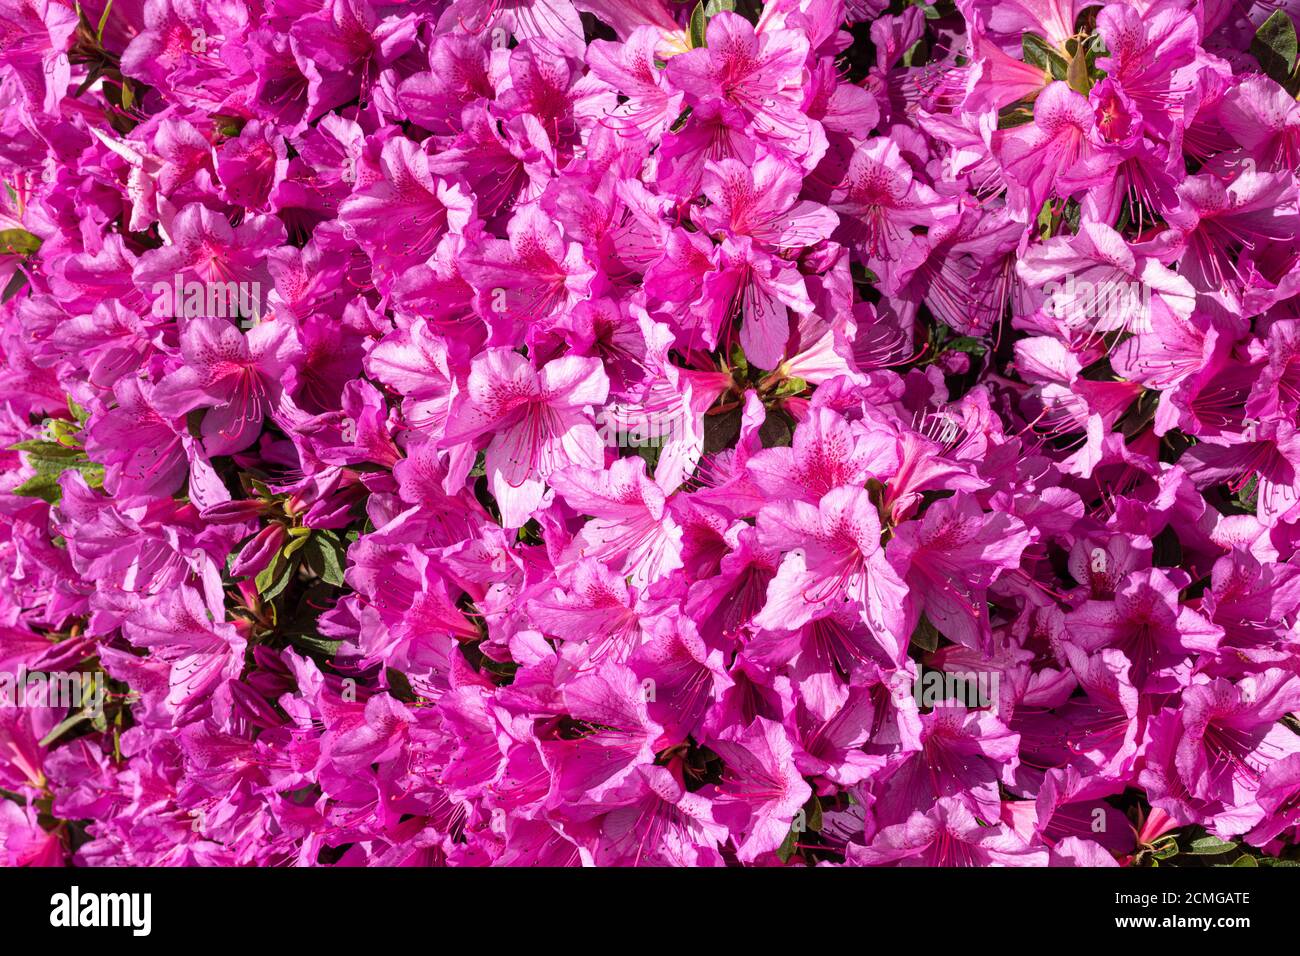 Vibrant Pink flower background. Rhododendron simsii plant Stock Photo